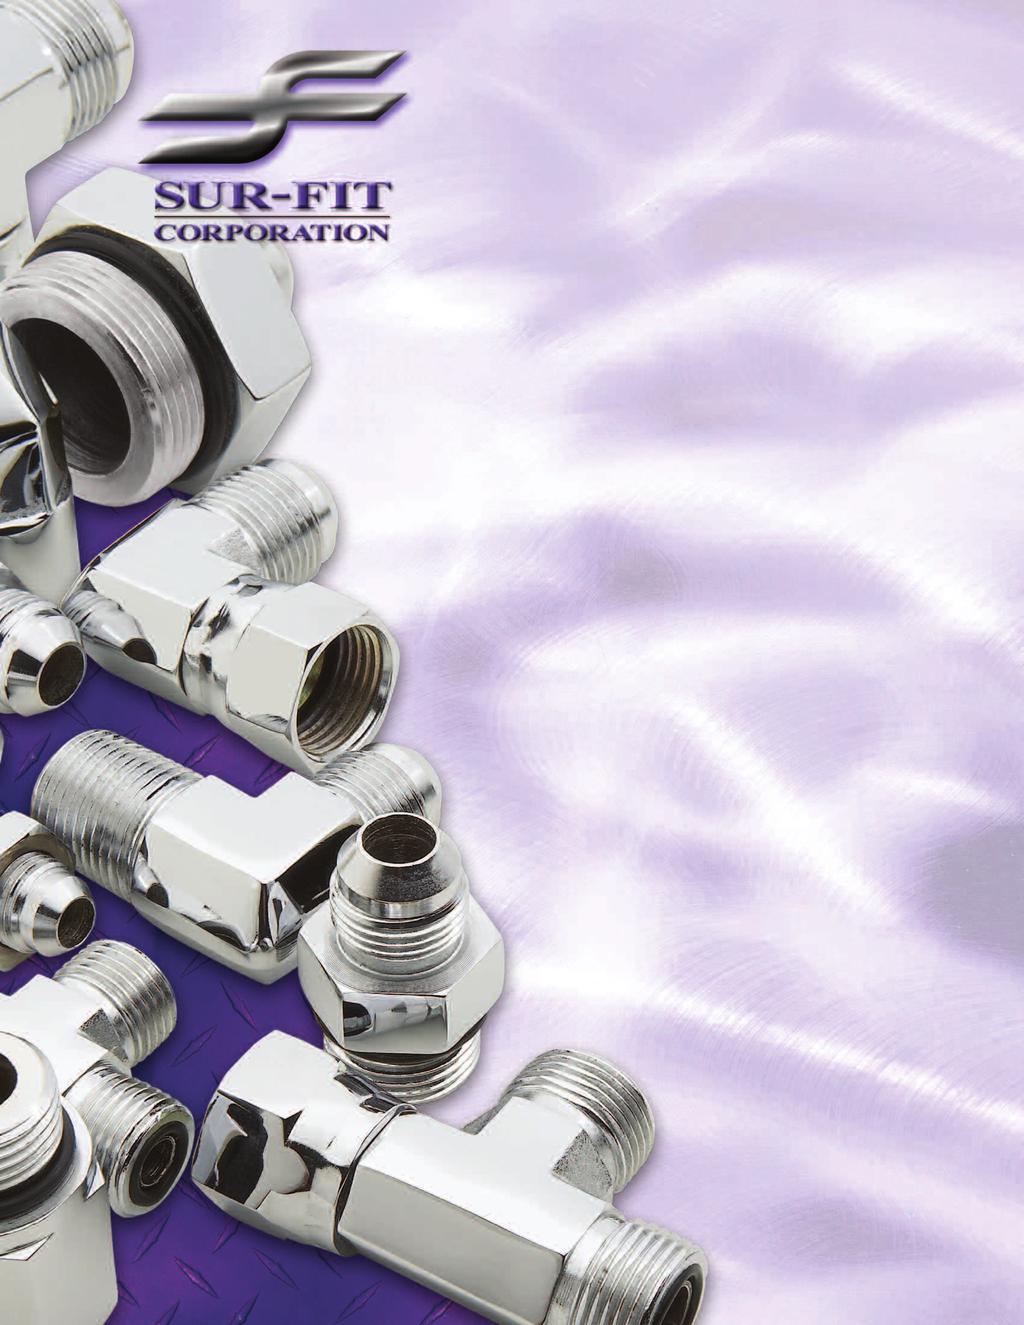 Founded in 1945, Serv-All has manufactured the finest hose couplings for industrial and petroleum applications. Serv-All fittings division is now Sur-Fit Corporation.